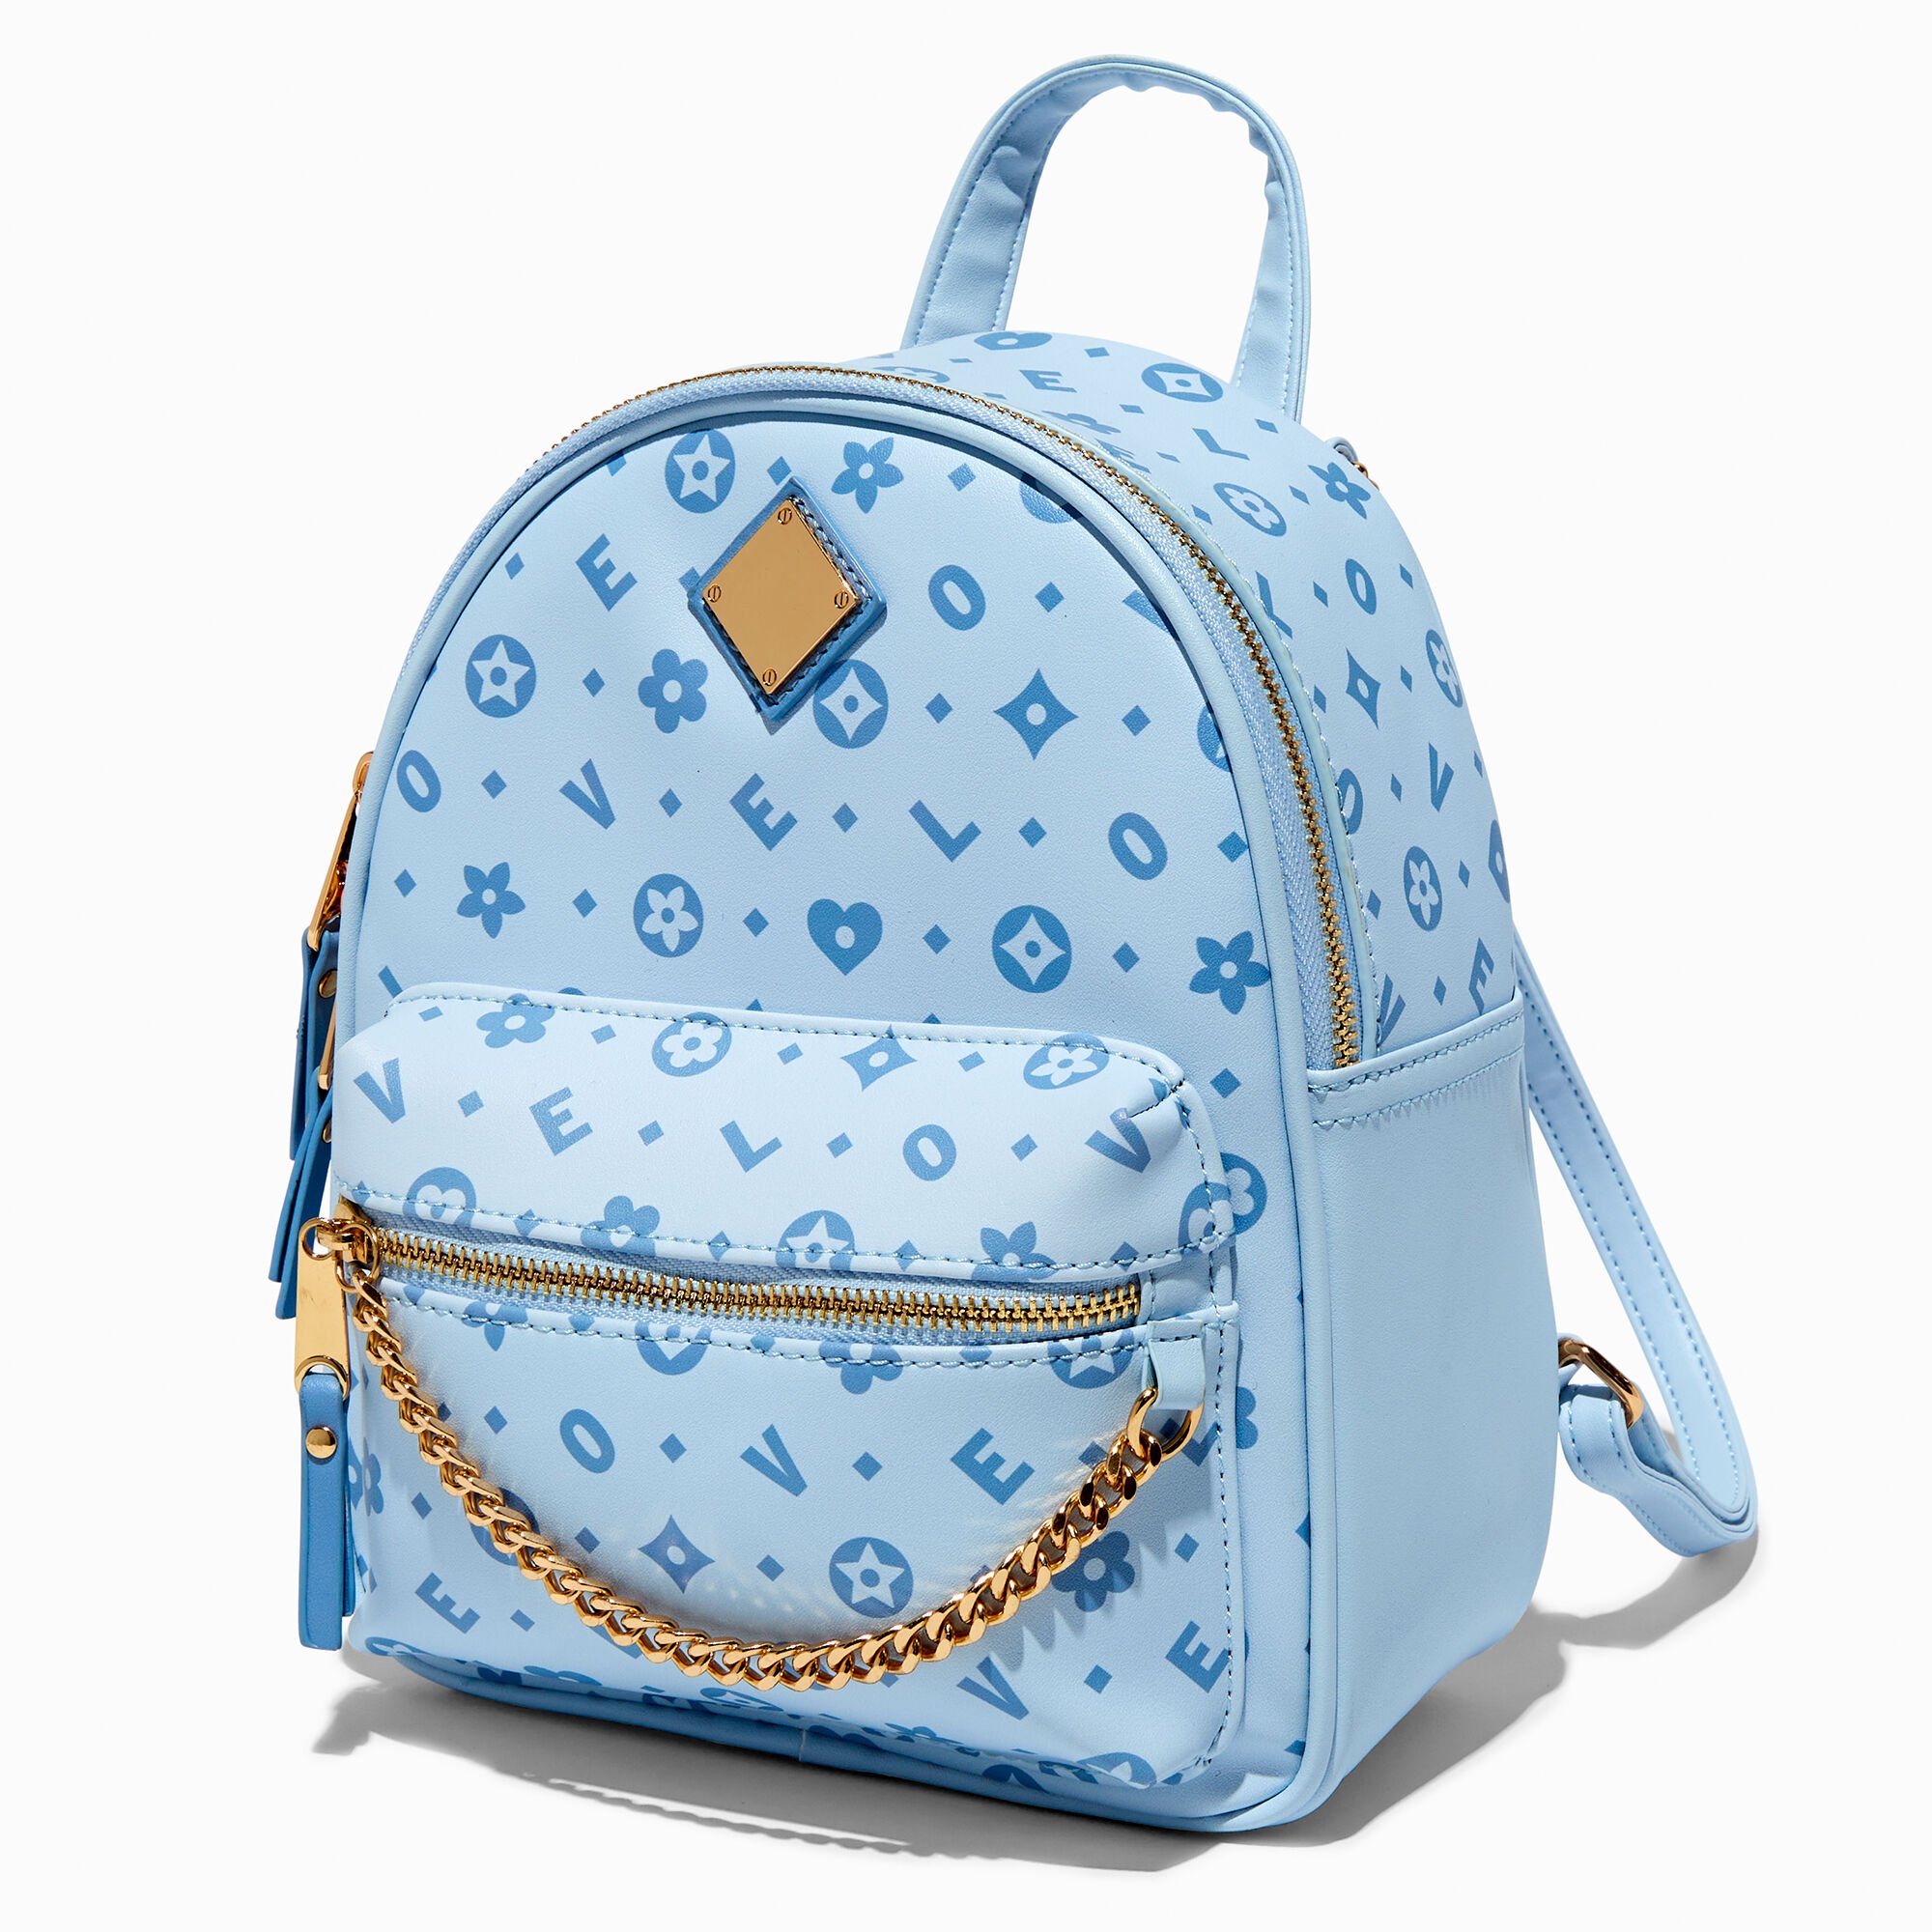 View Claires Status Icons Medium Backpack Blue information